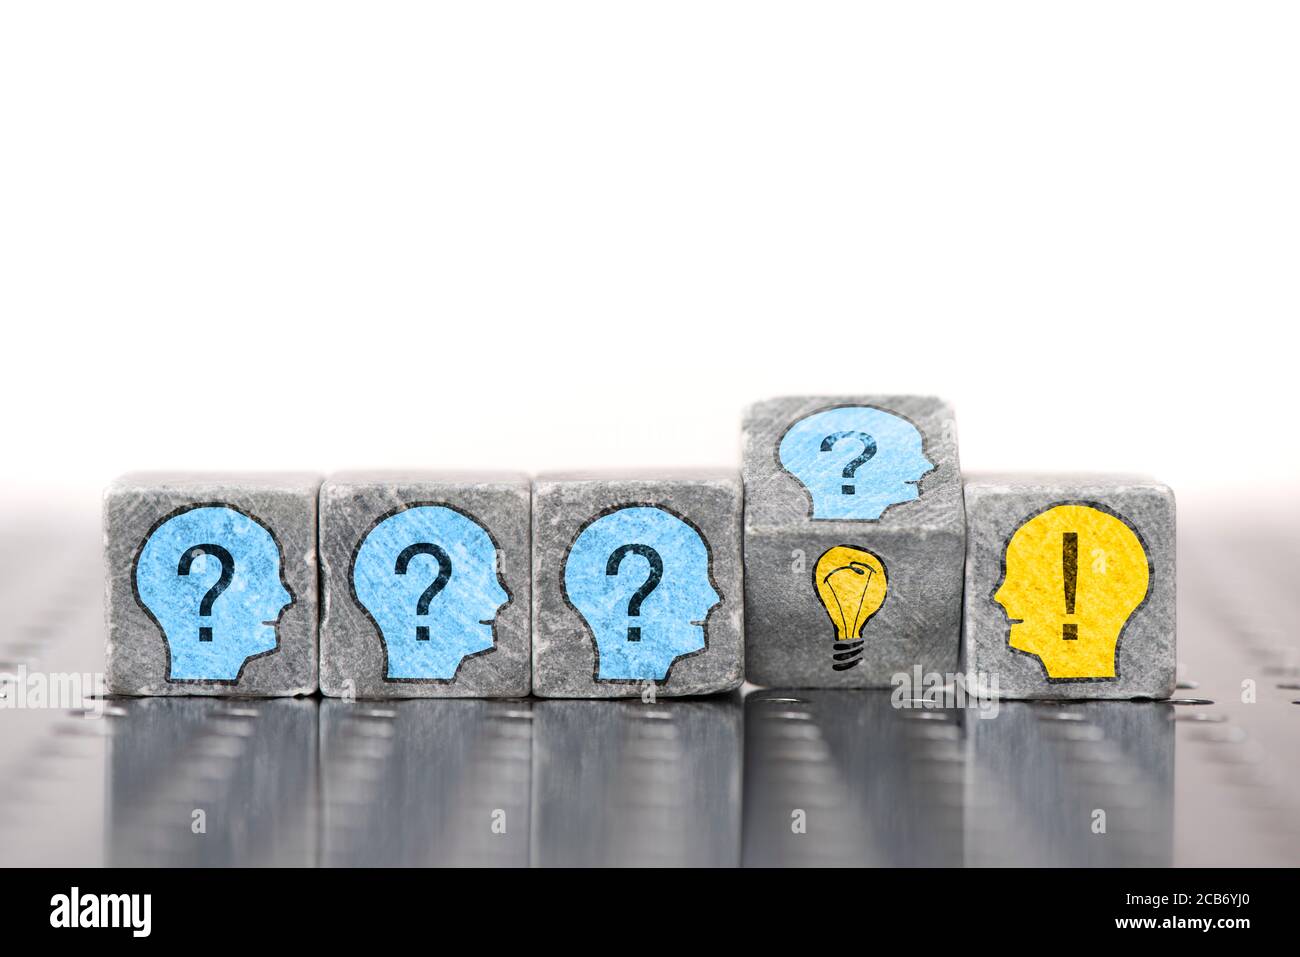 question and creative ideas printed on stones Stock Photo